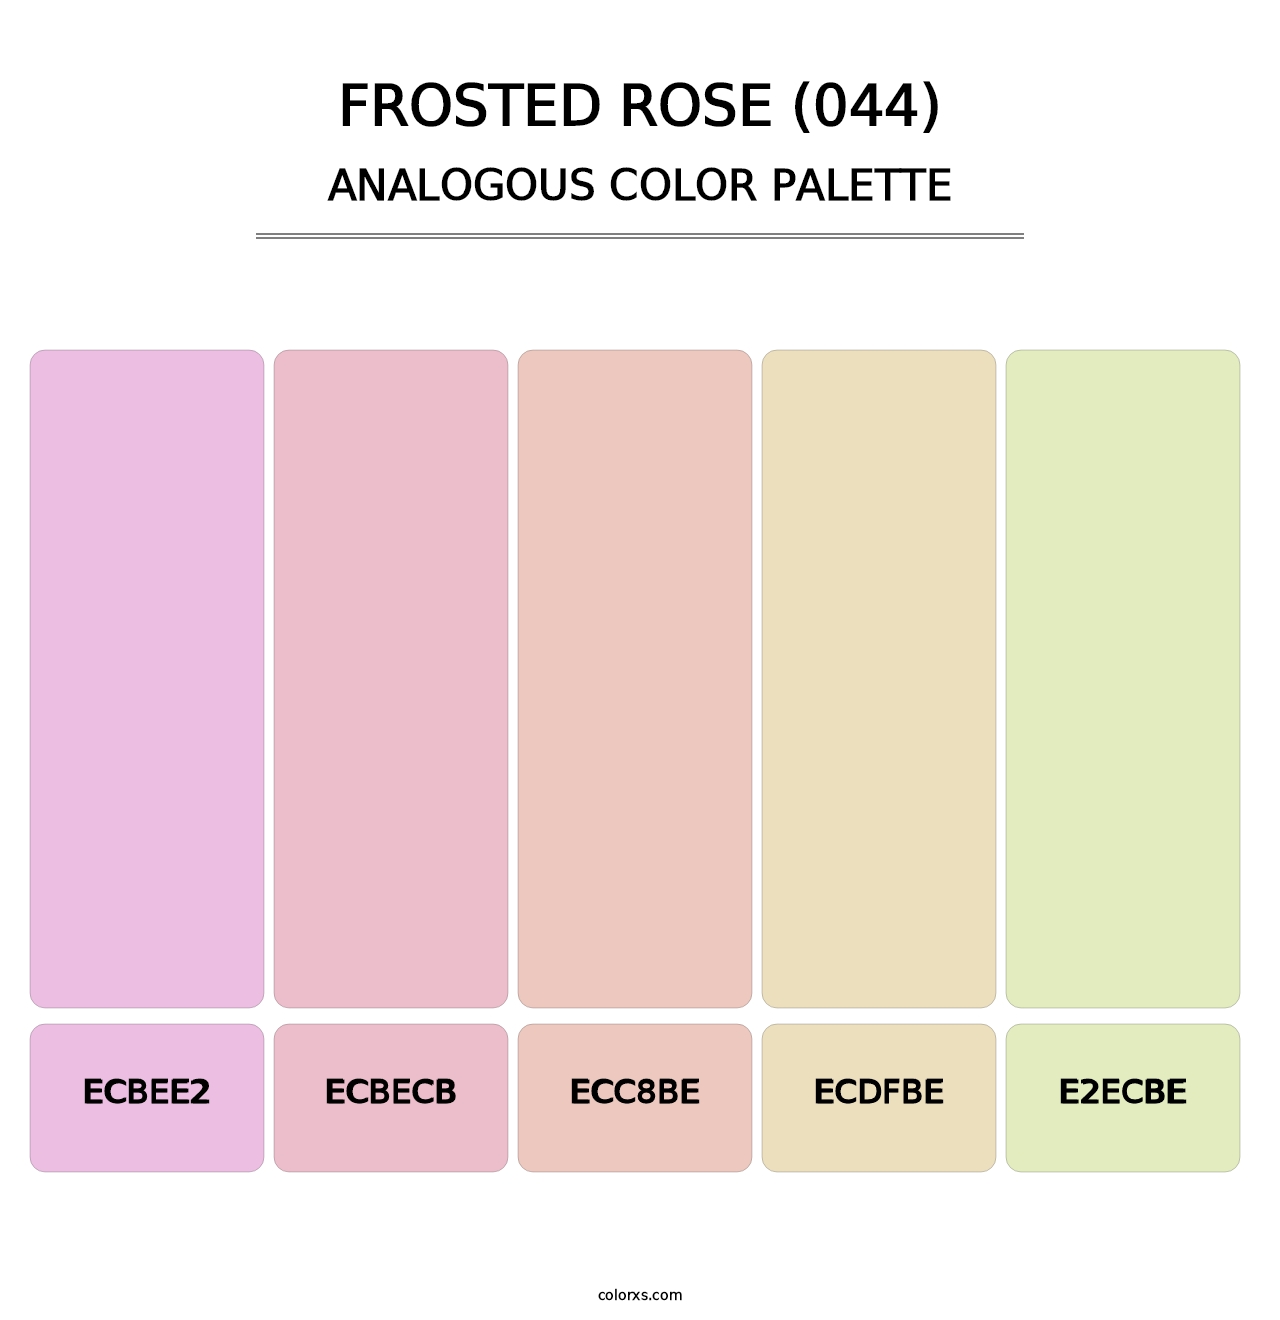 Frosted Rose (044) - Analogous Color Palette